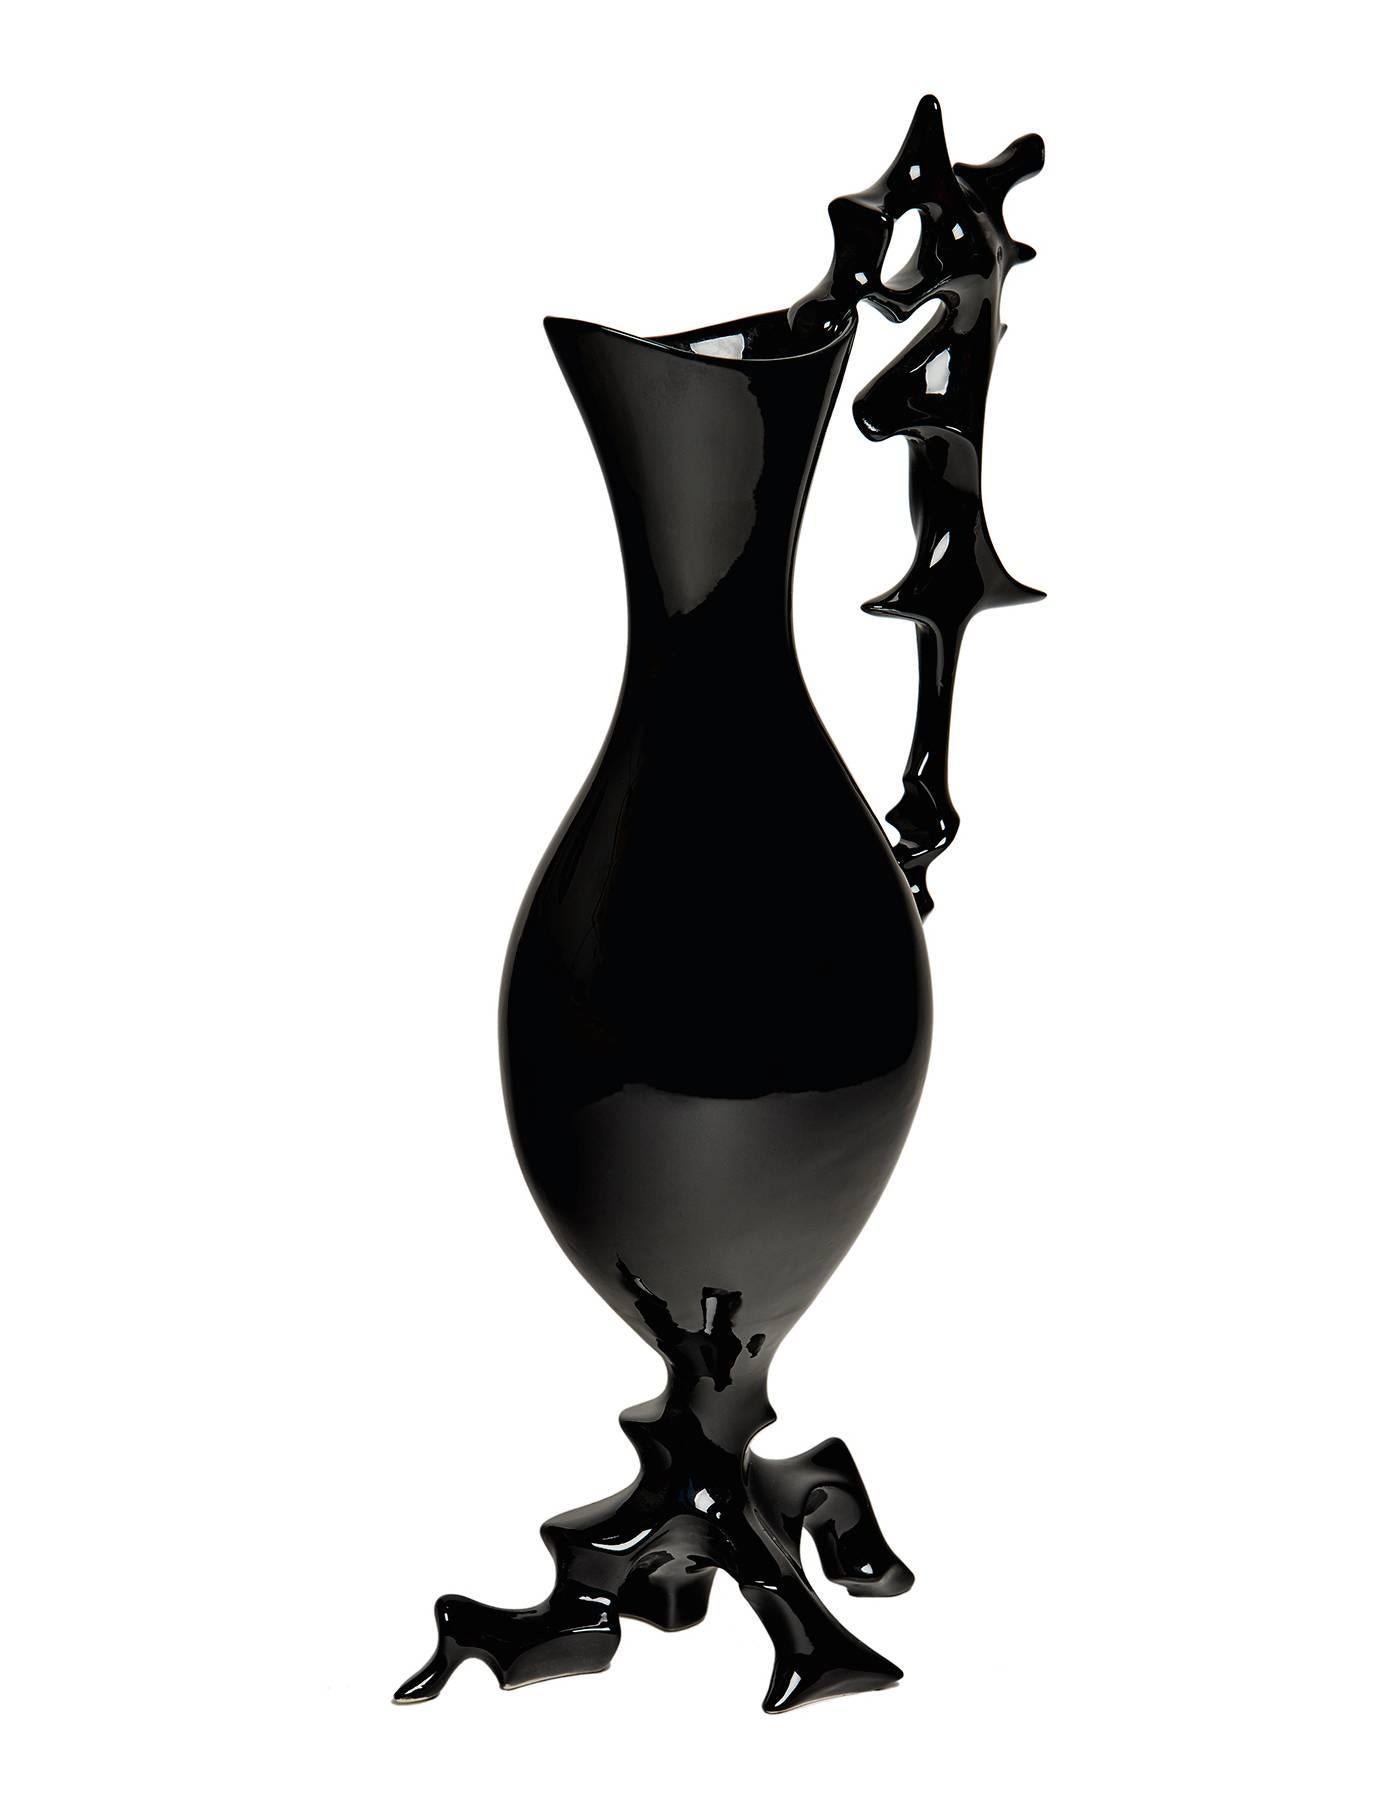 Italian Rare and Tall 1953 Vase by Antonia Campi For Sale